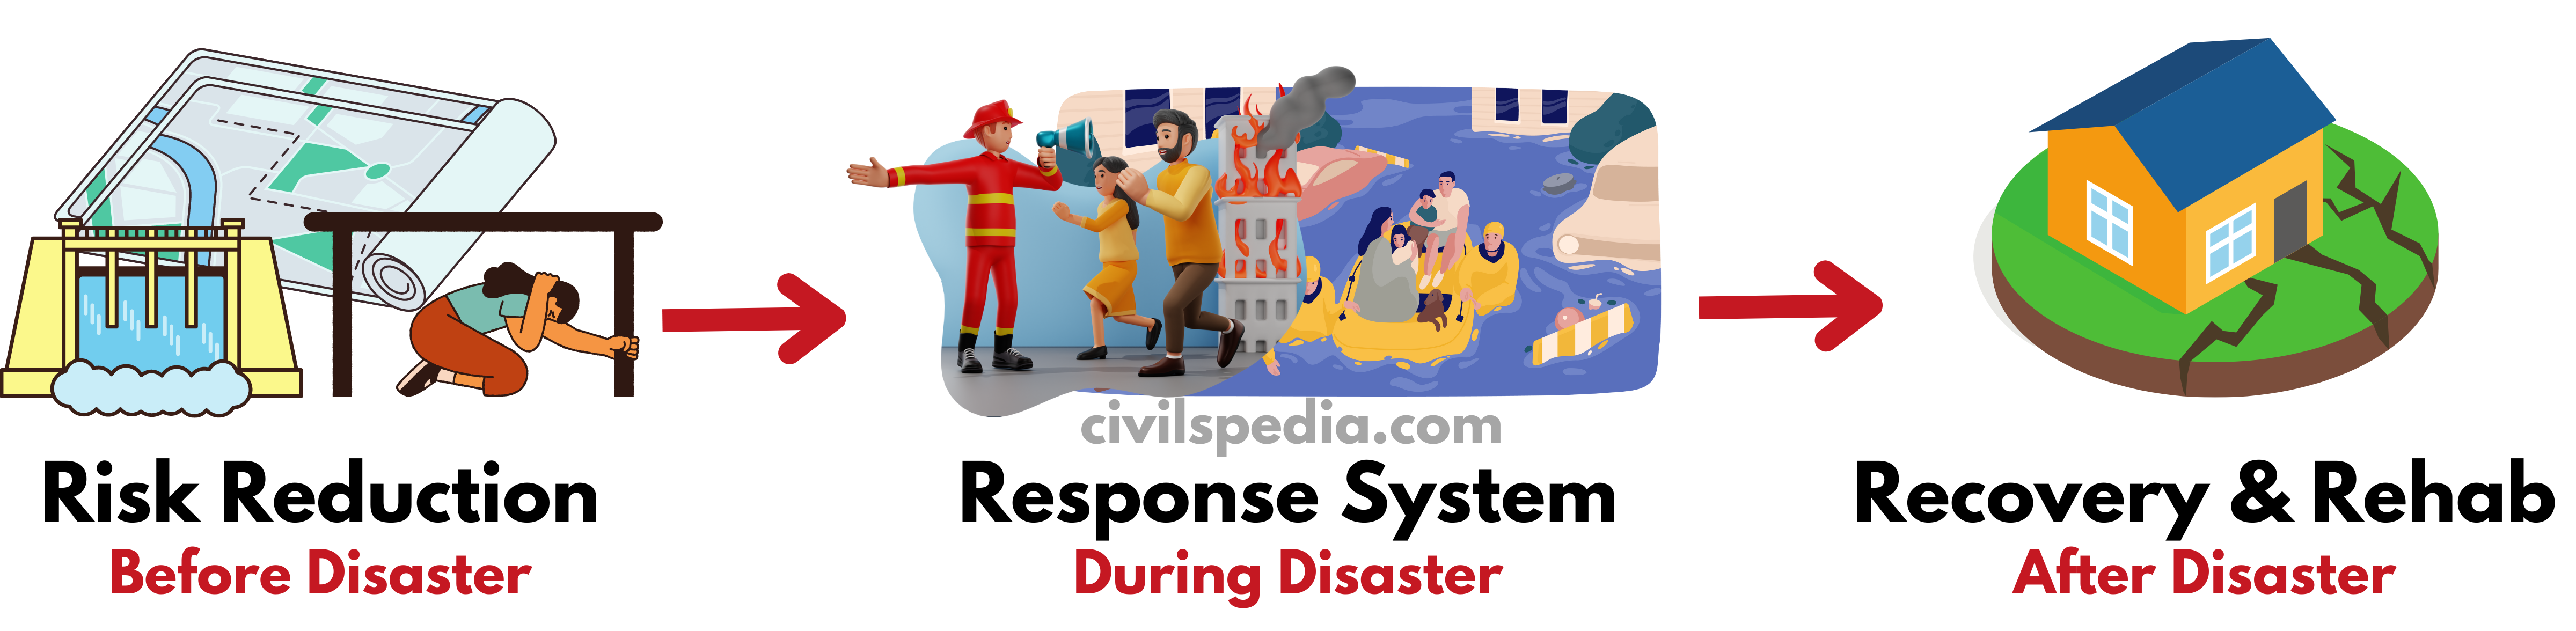 Concept of the Disaster Management